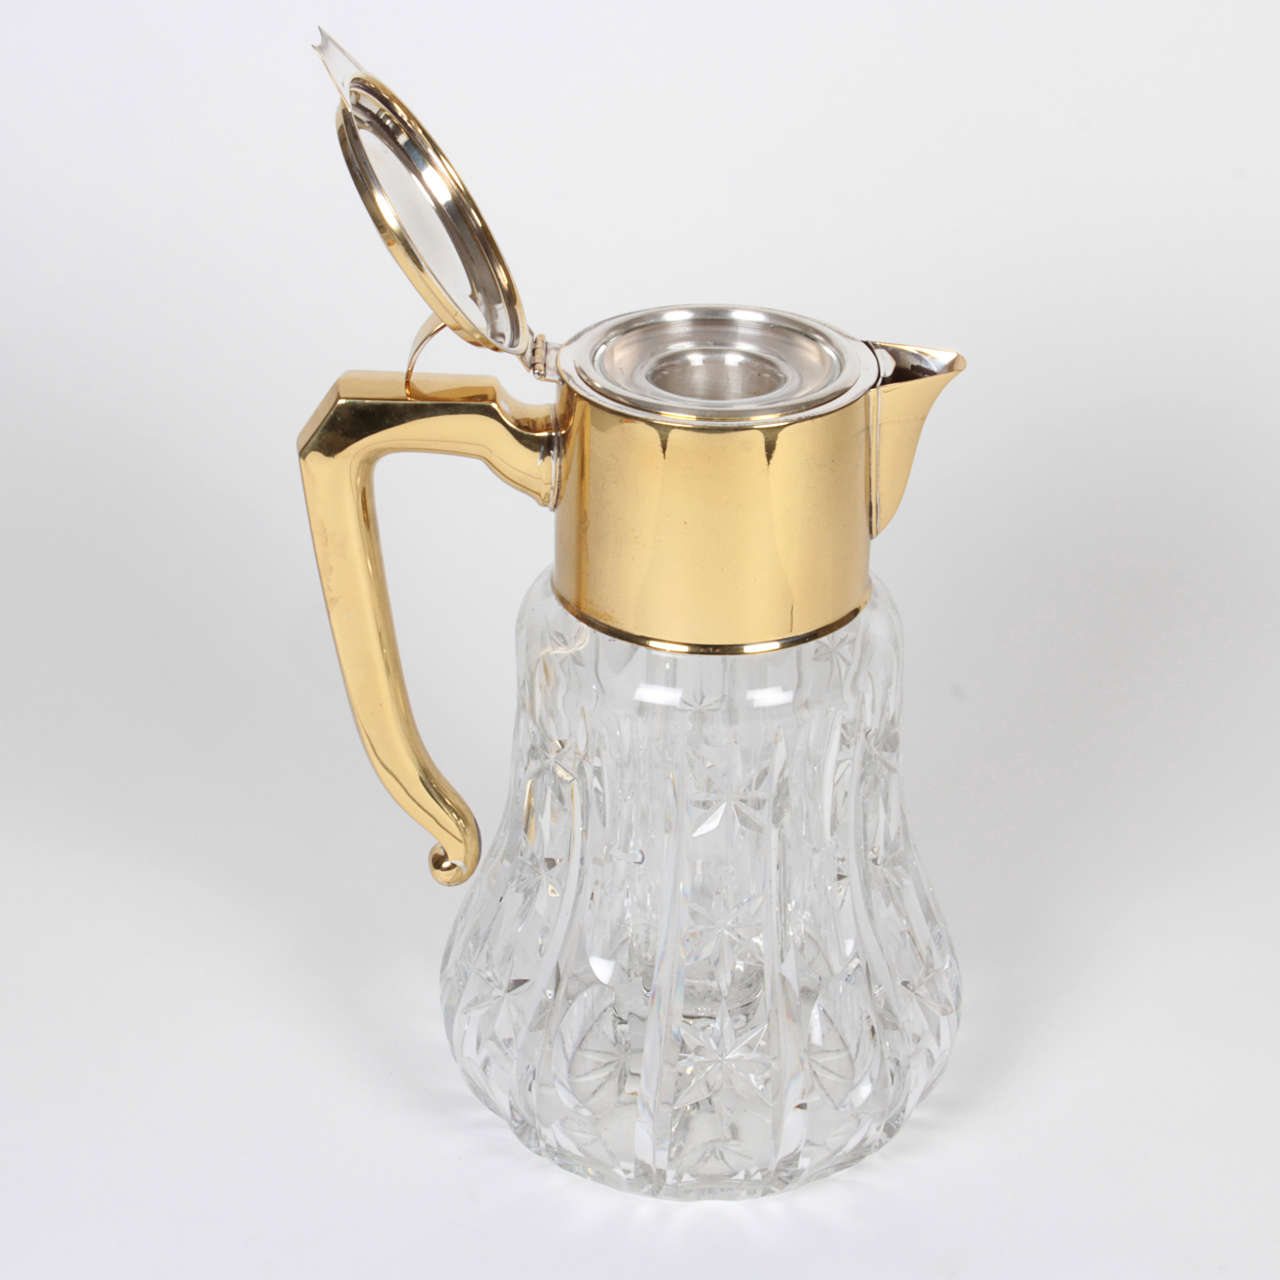 Vintage English pitcher with ice insert. Rare yet functional design makes this perfect for entertaining.